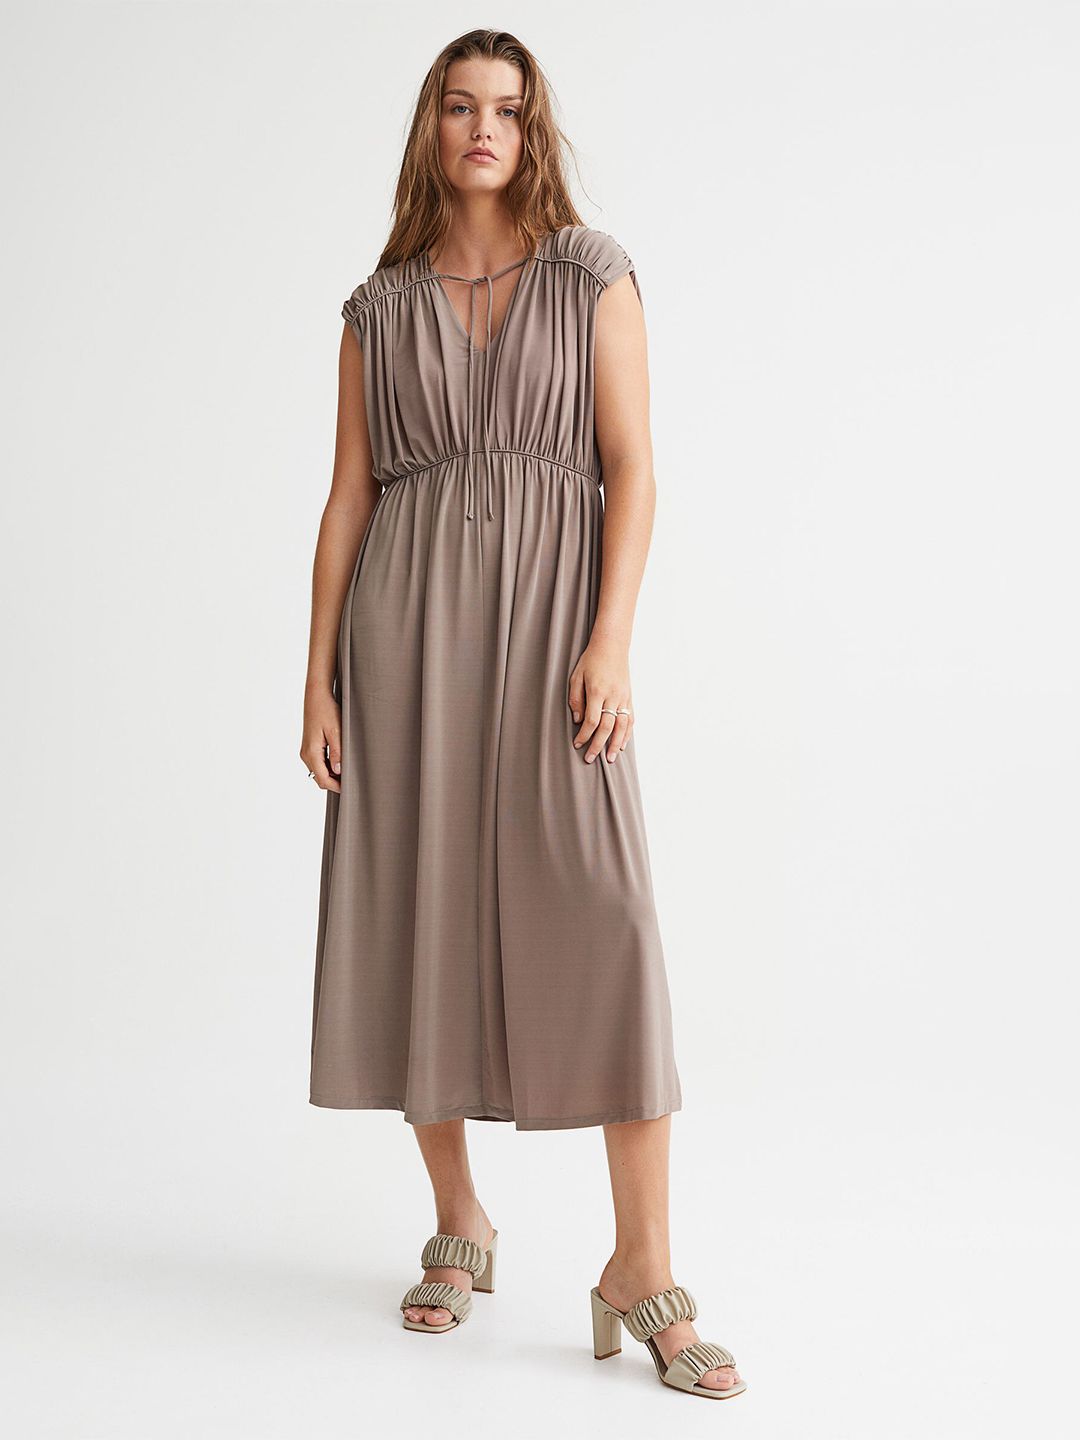 H&M Women Beige Long Gathered Dress Price in India